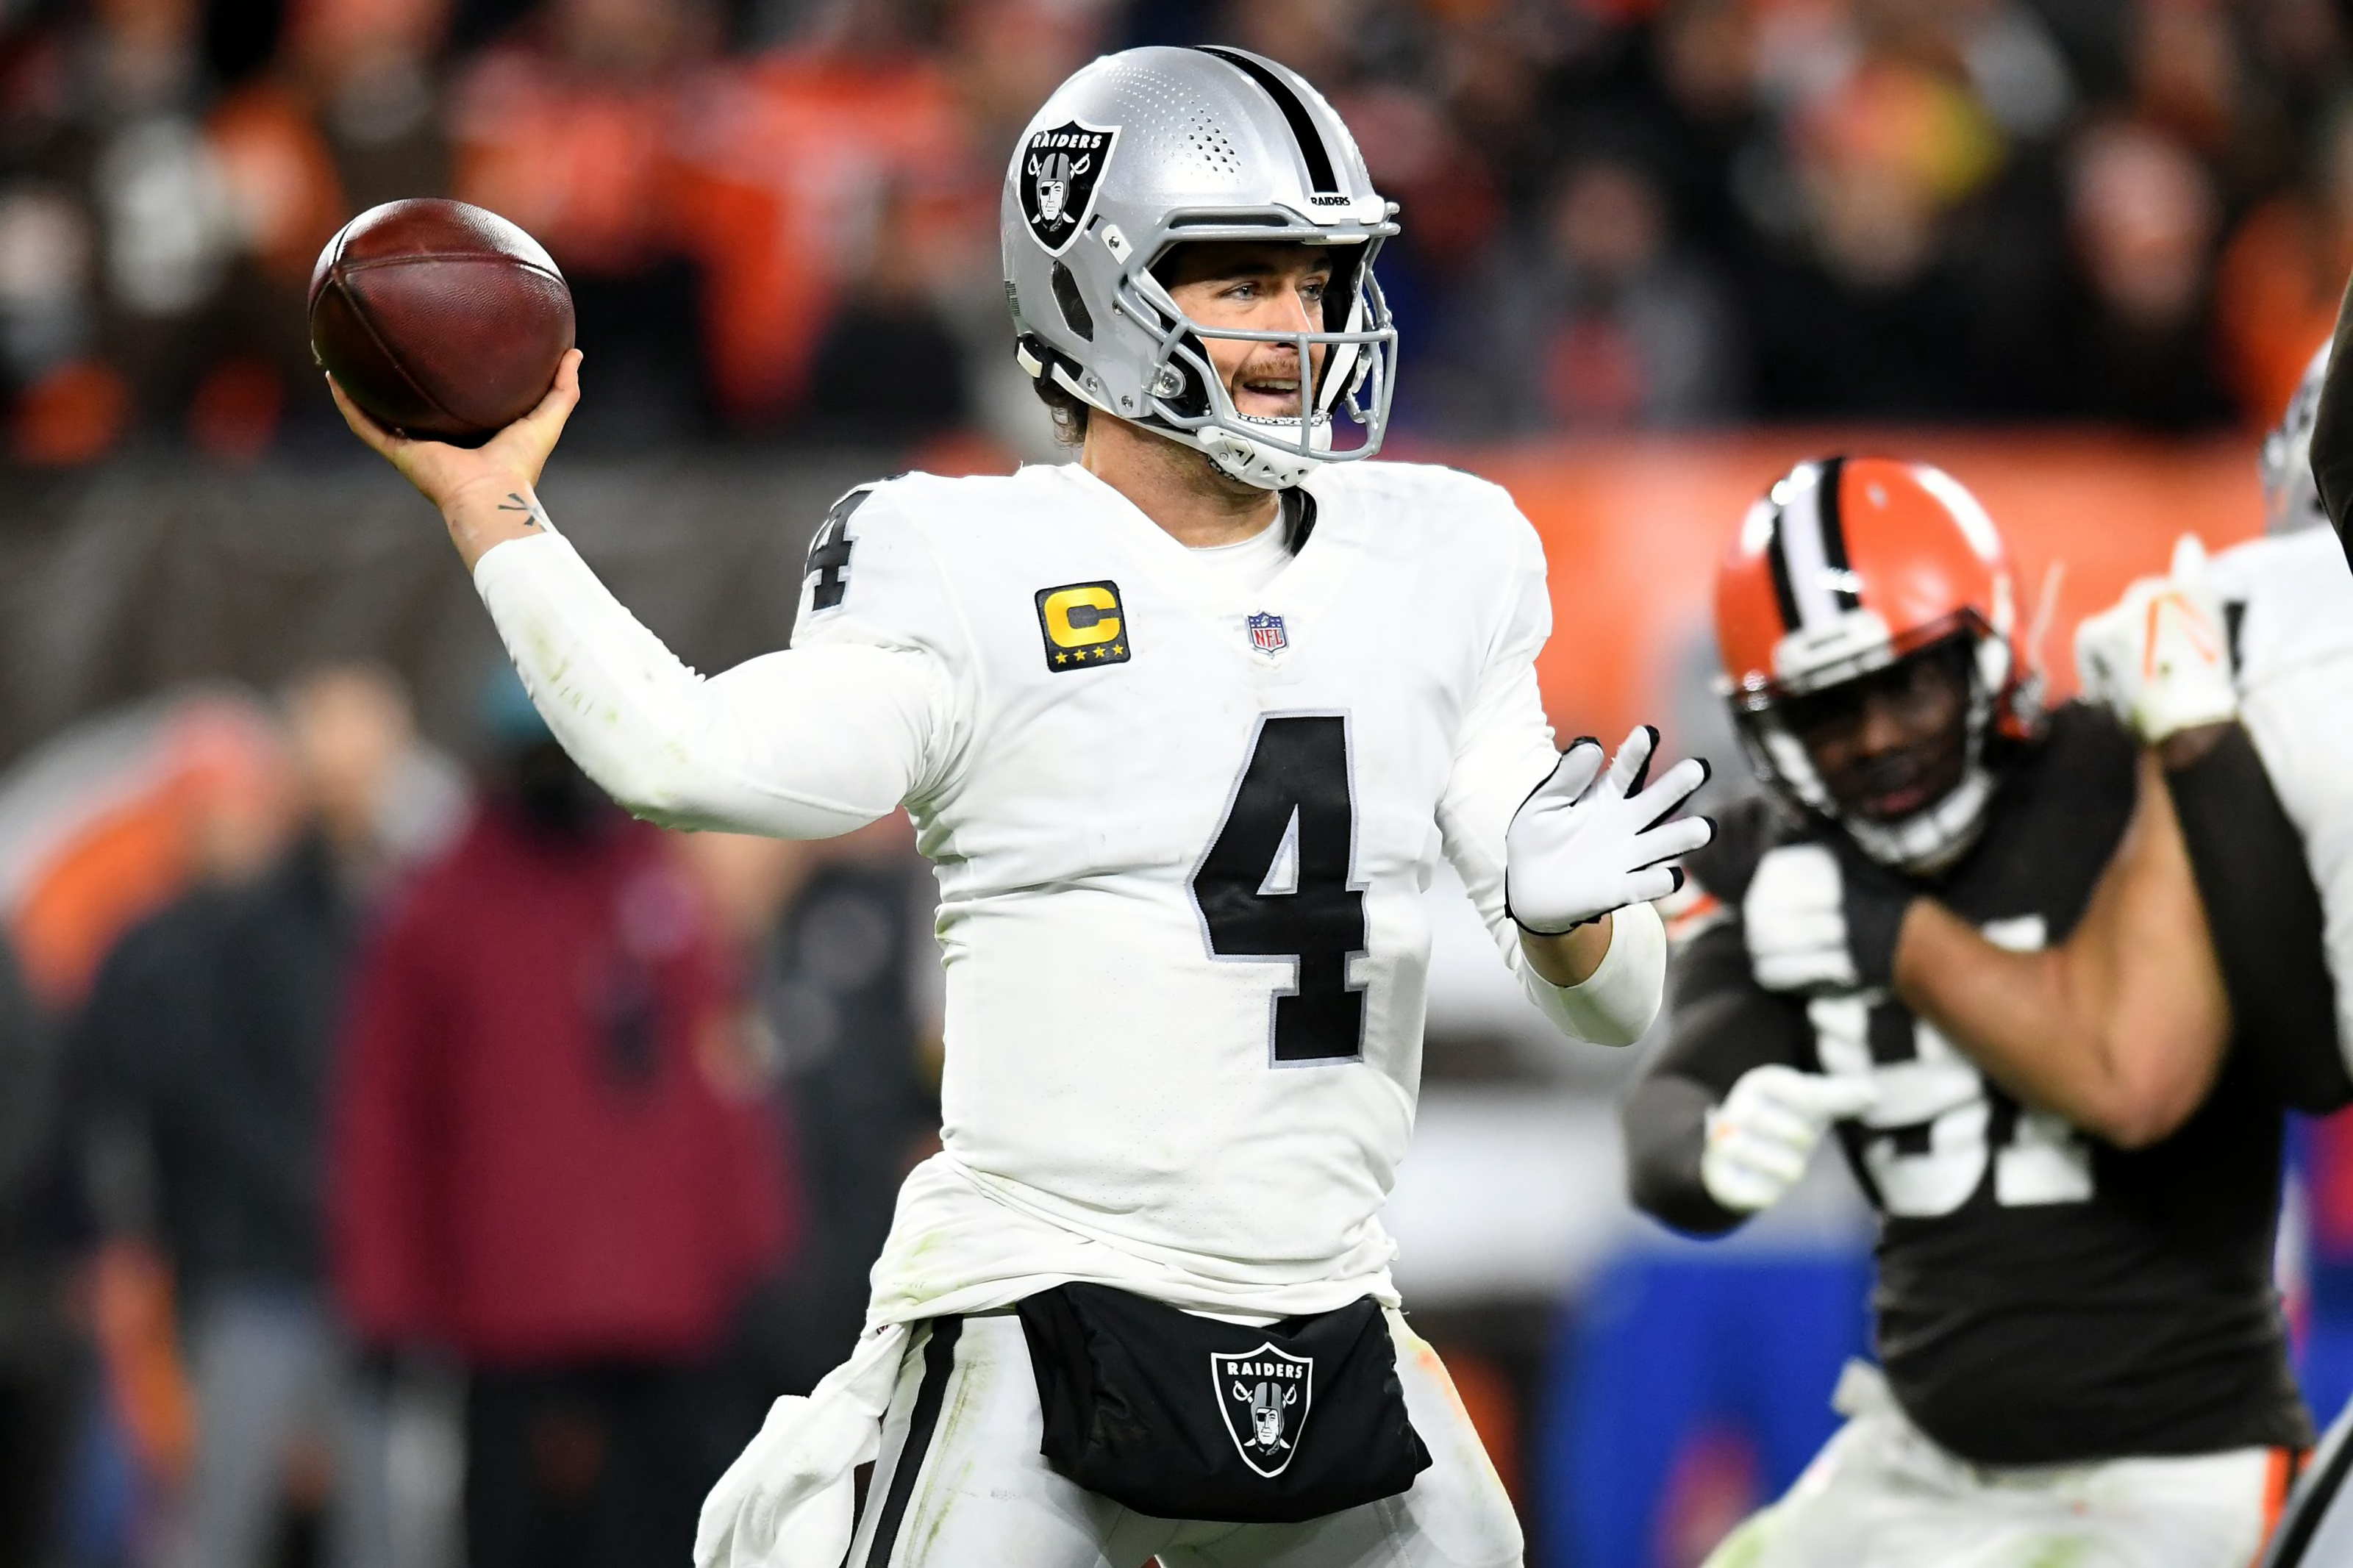 Raiders QB Derek Carr entering the most crucial stretch of his NFL career